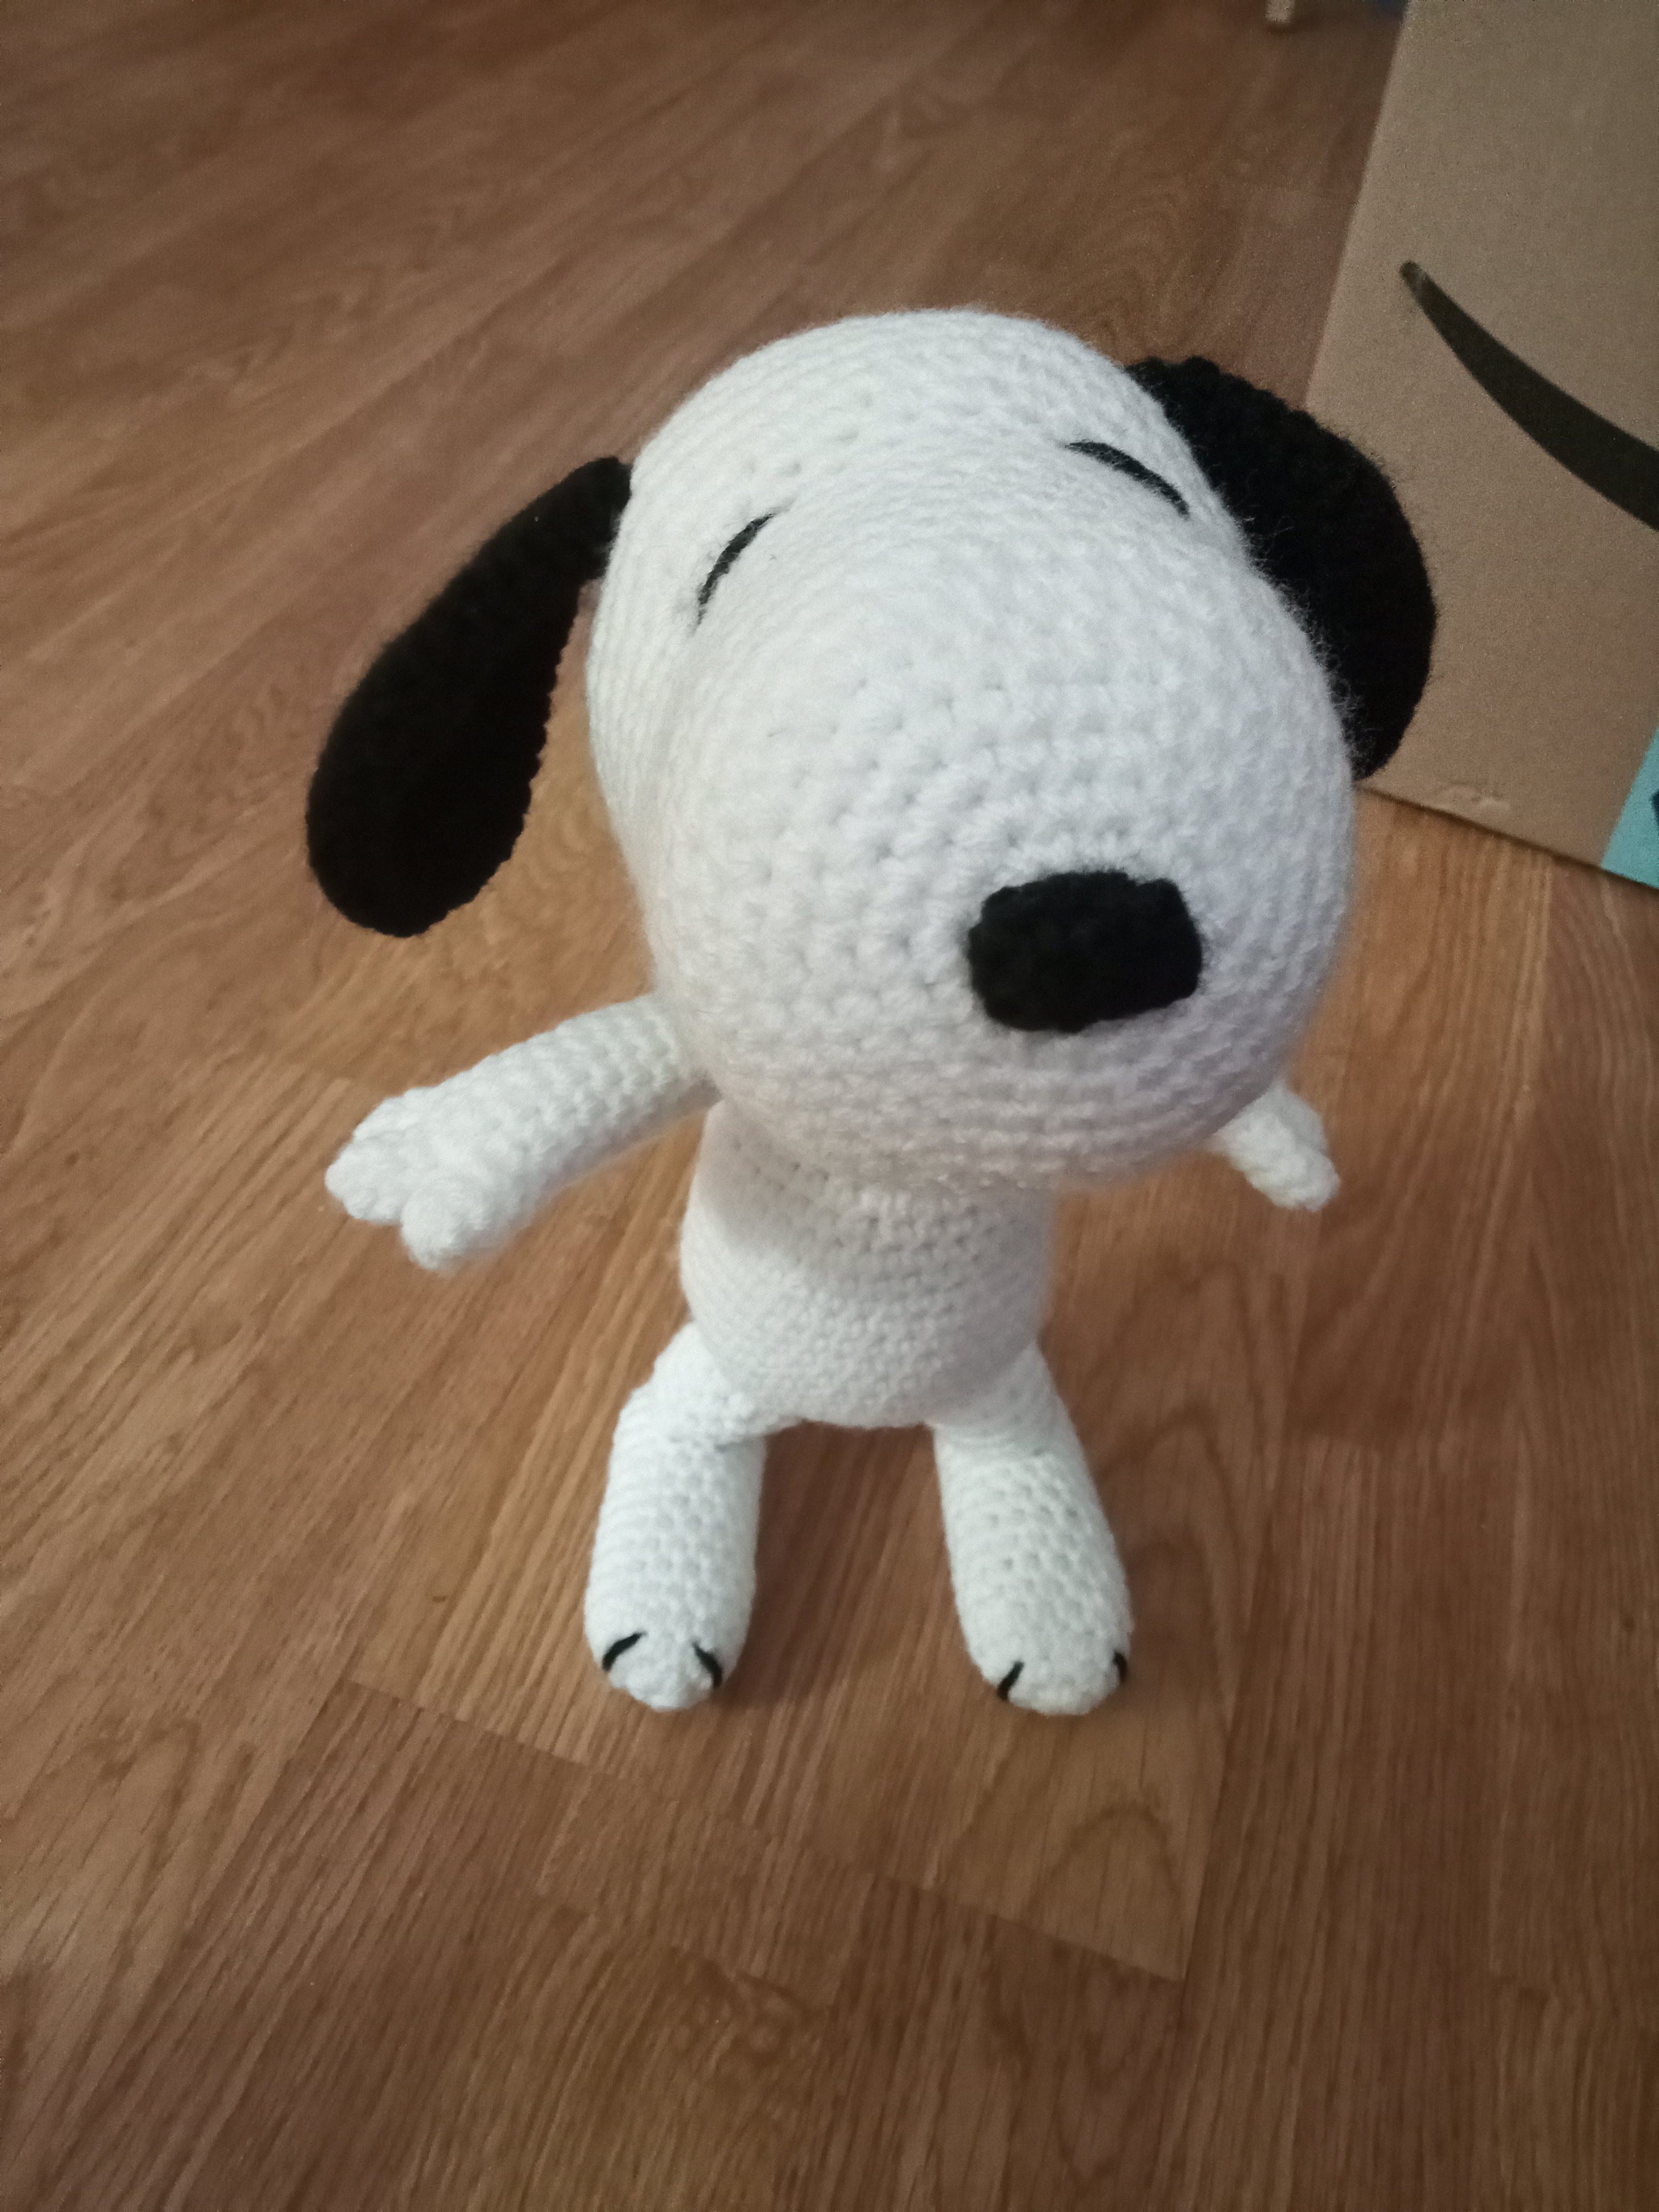 a front view of a crocheted Snoopy standing on a wooden floor